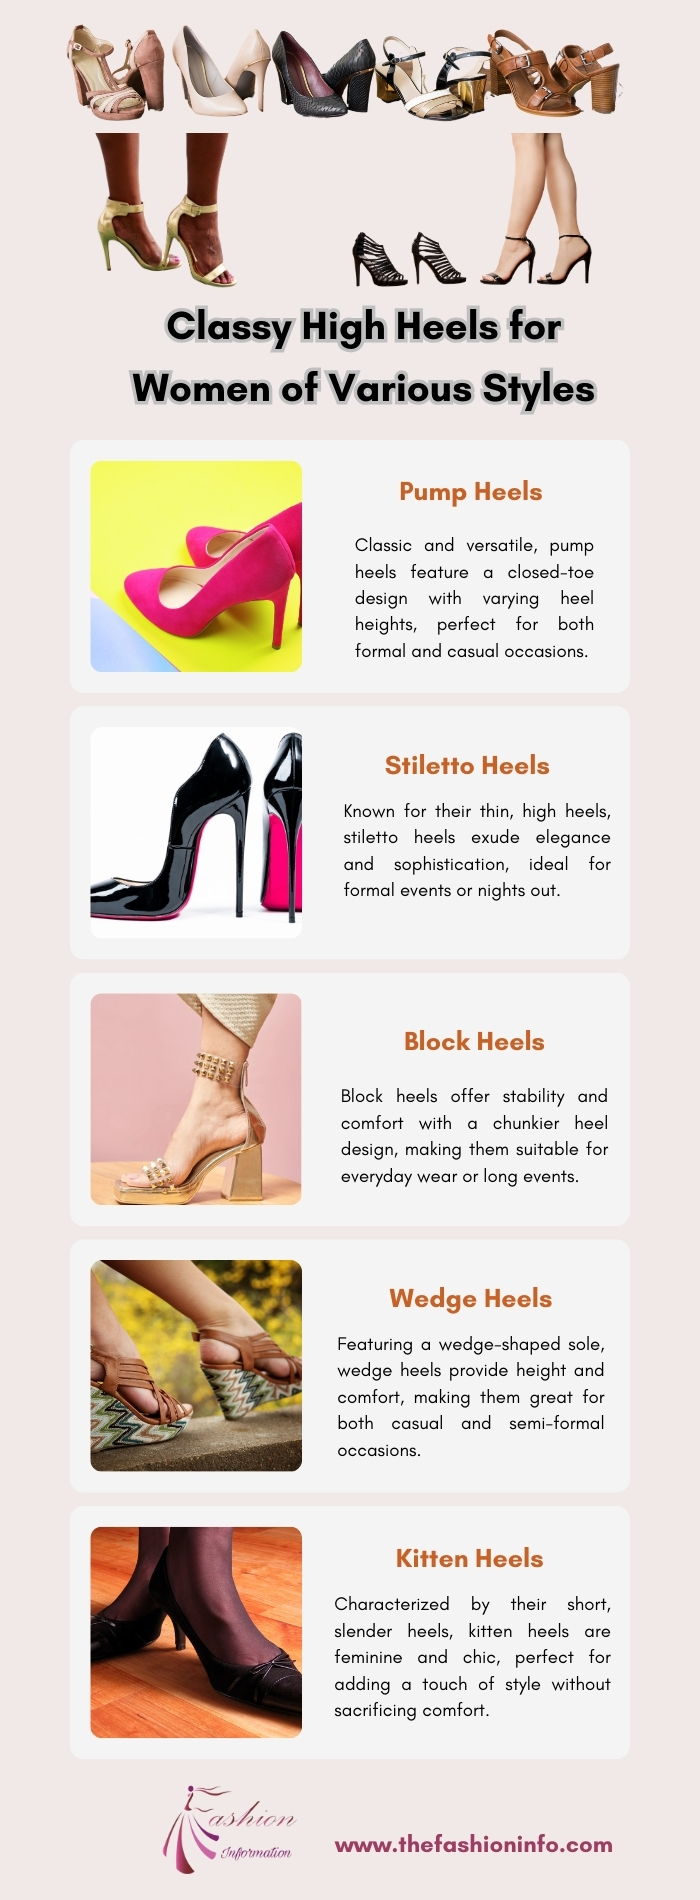 Classy High Heels for Women of Various Styles